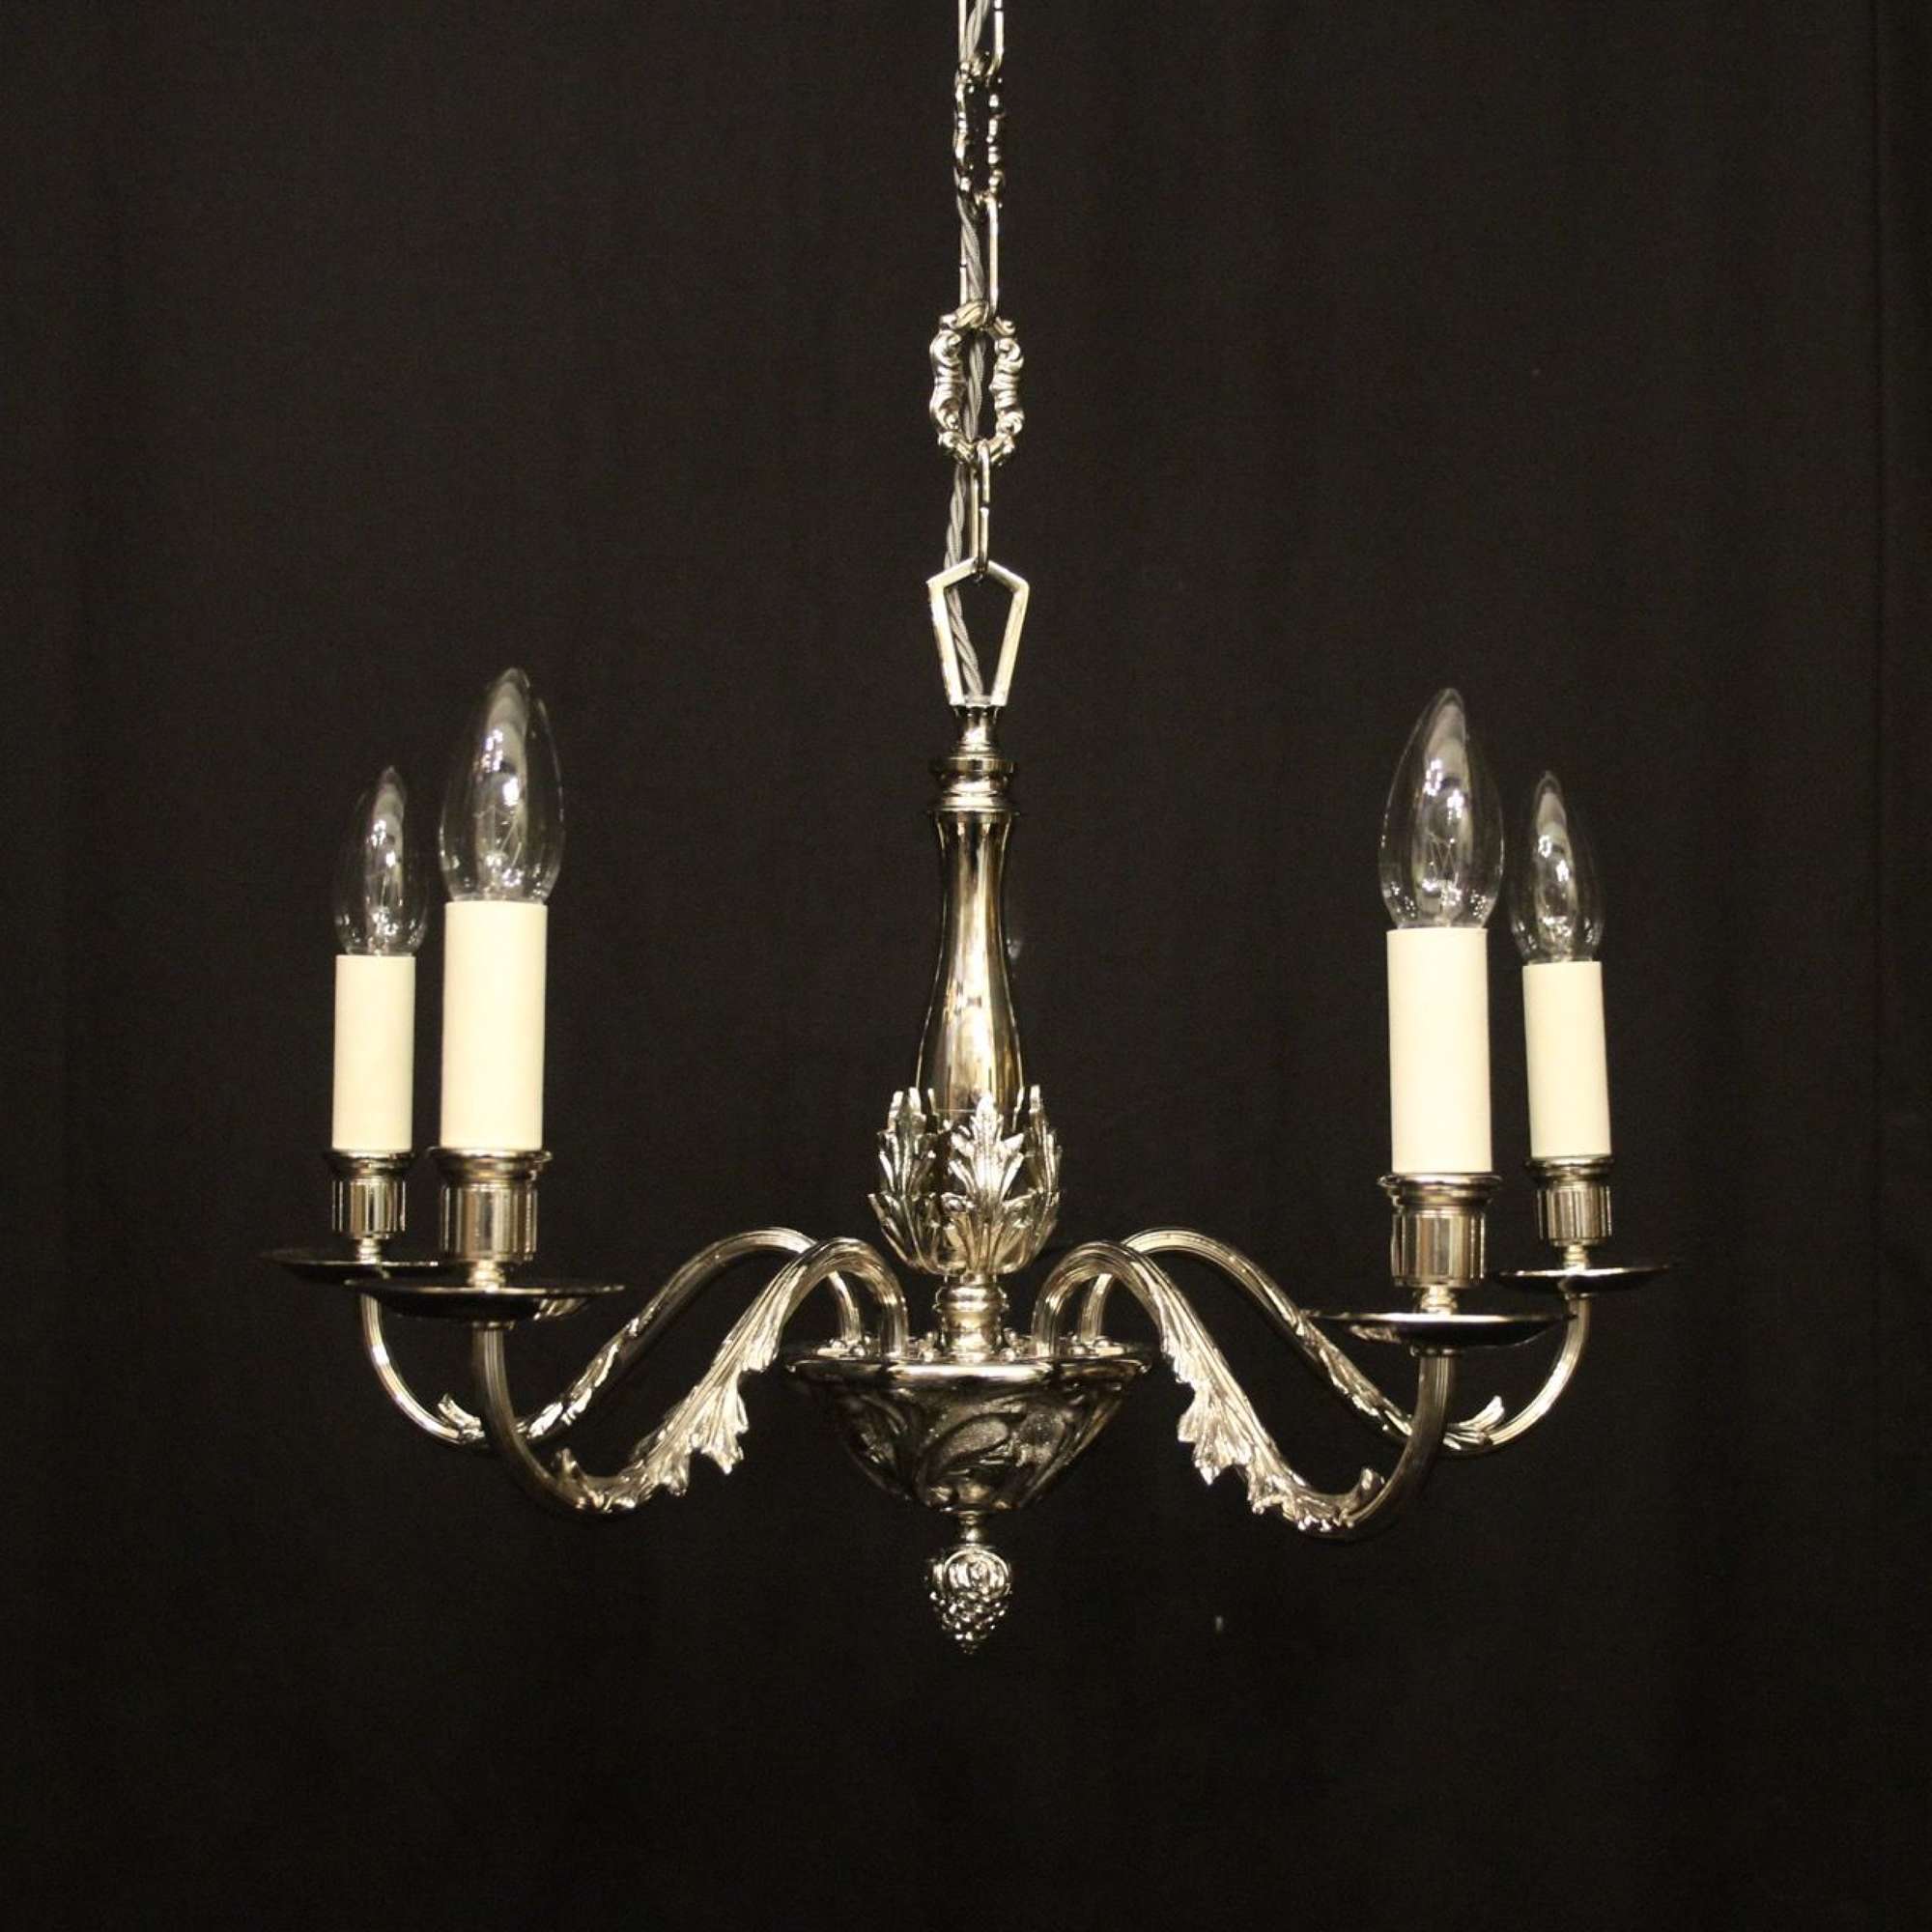 French Nickel Plated 5 Light Antique Chandelier